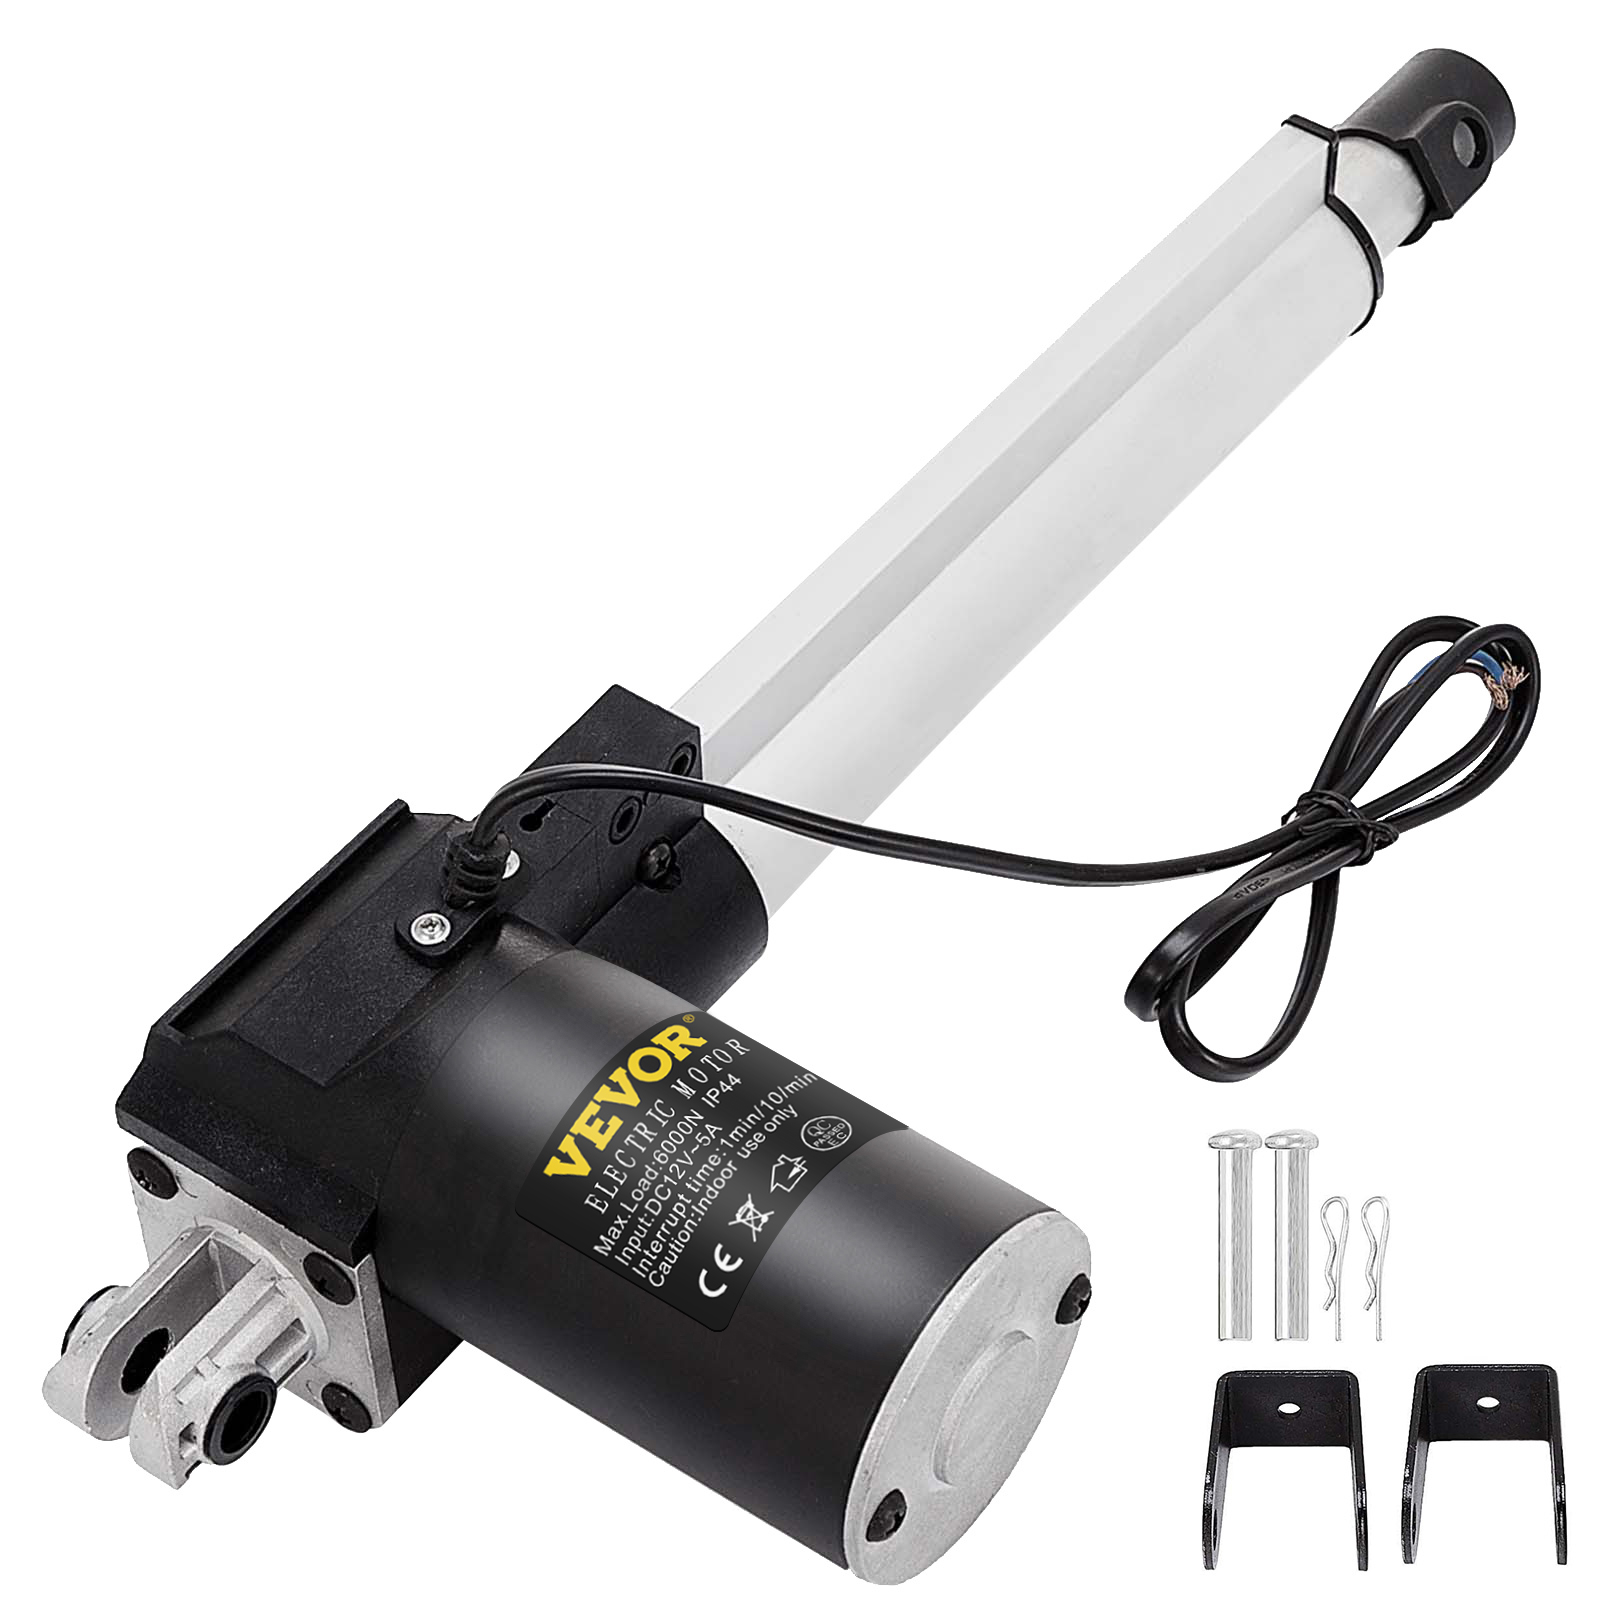 Car Truck 6"Linear Actuator 12V 100 Lbs with Adjustable Stroke GE6 Free Shipping 